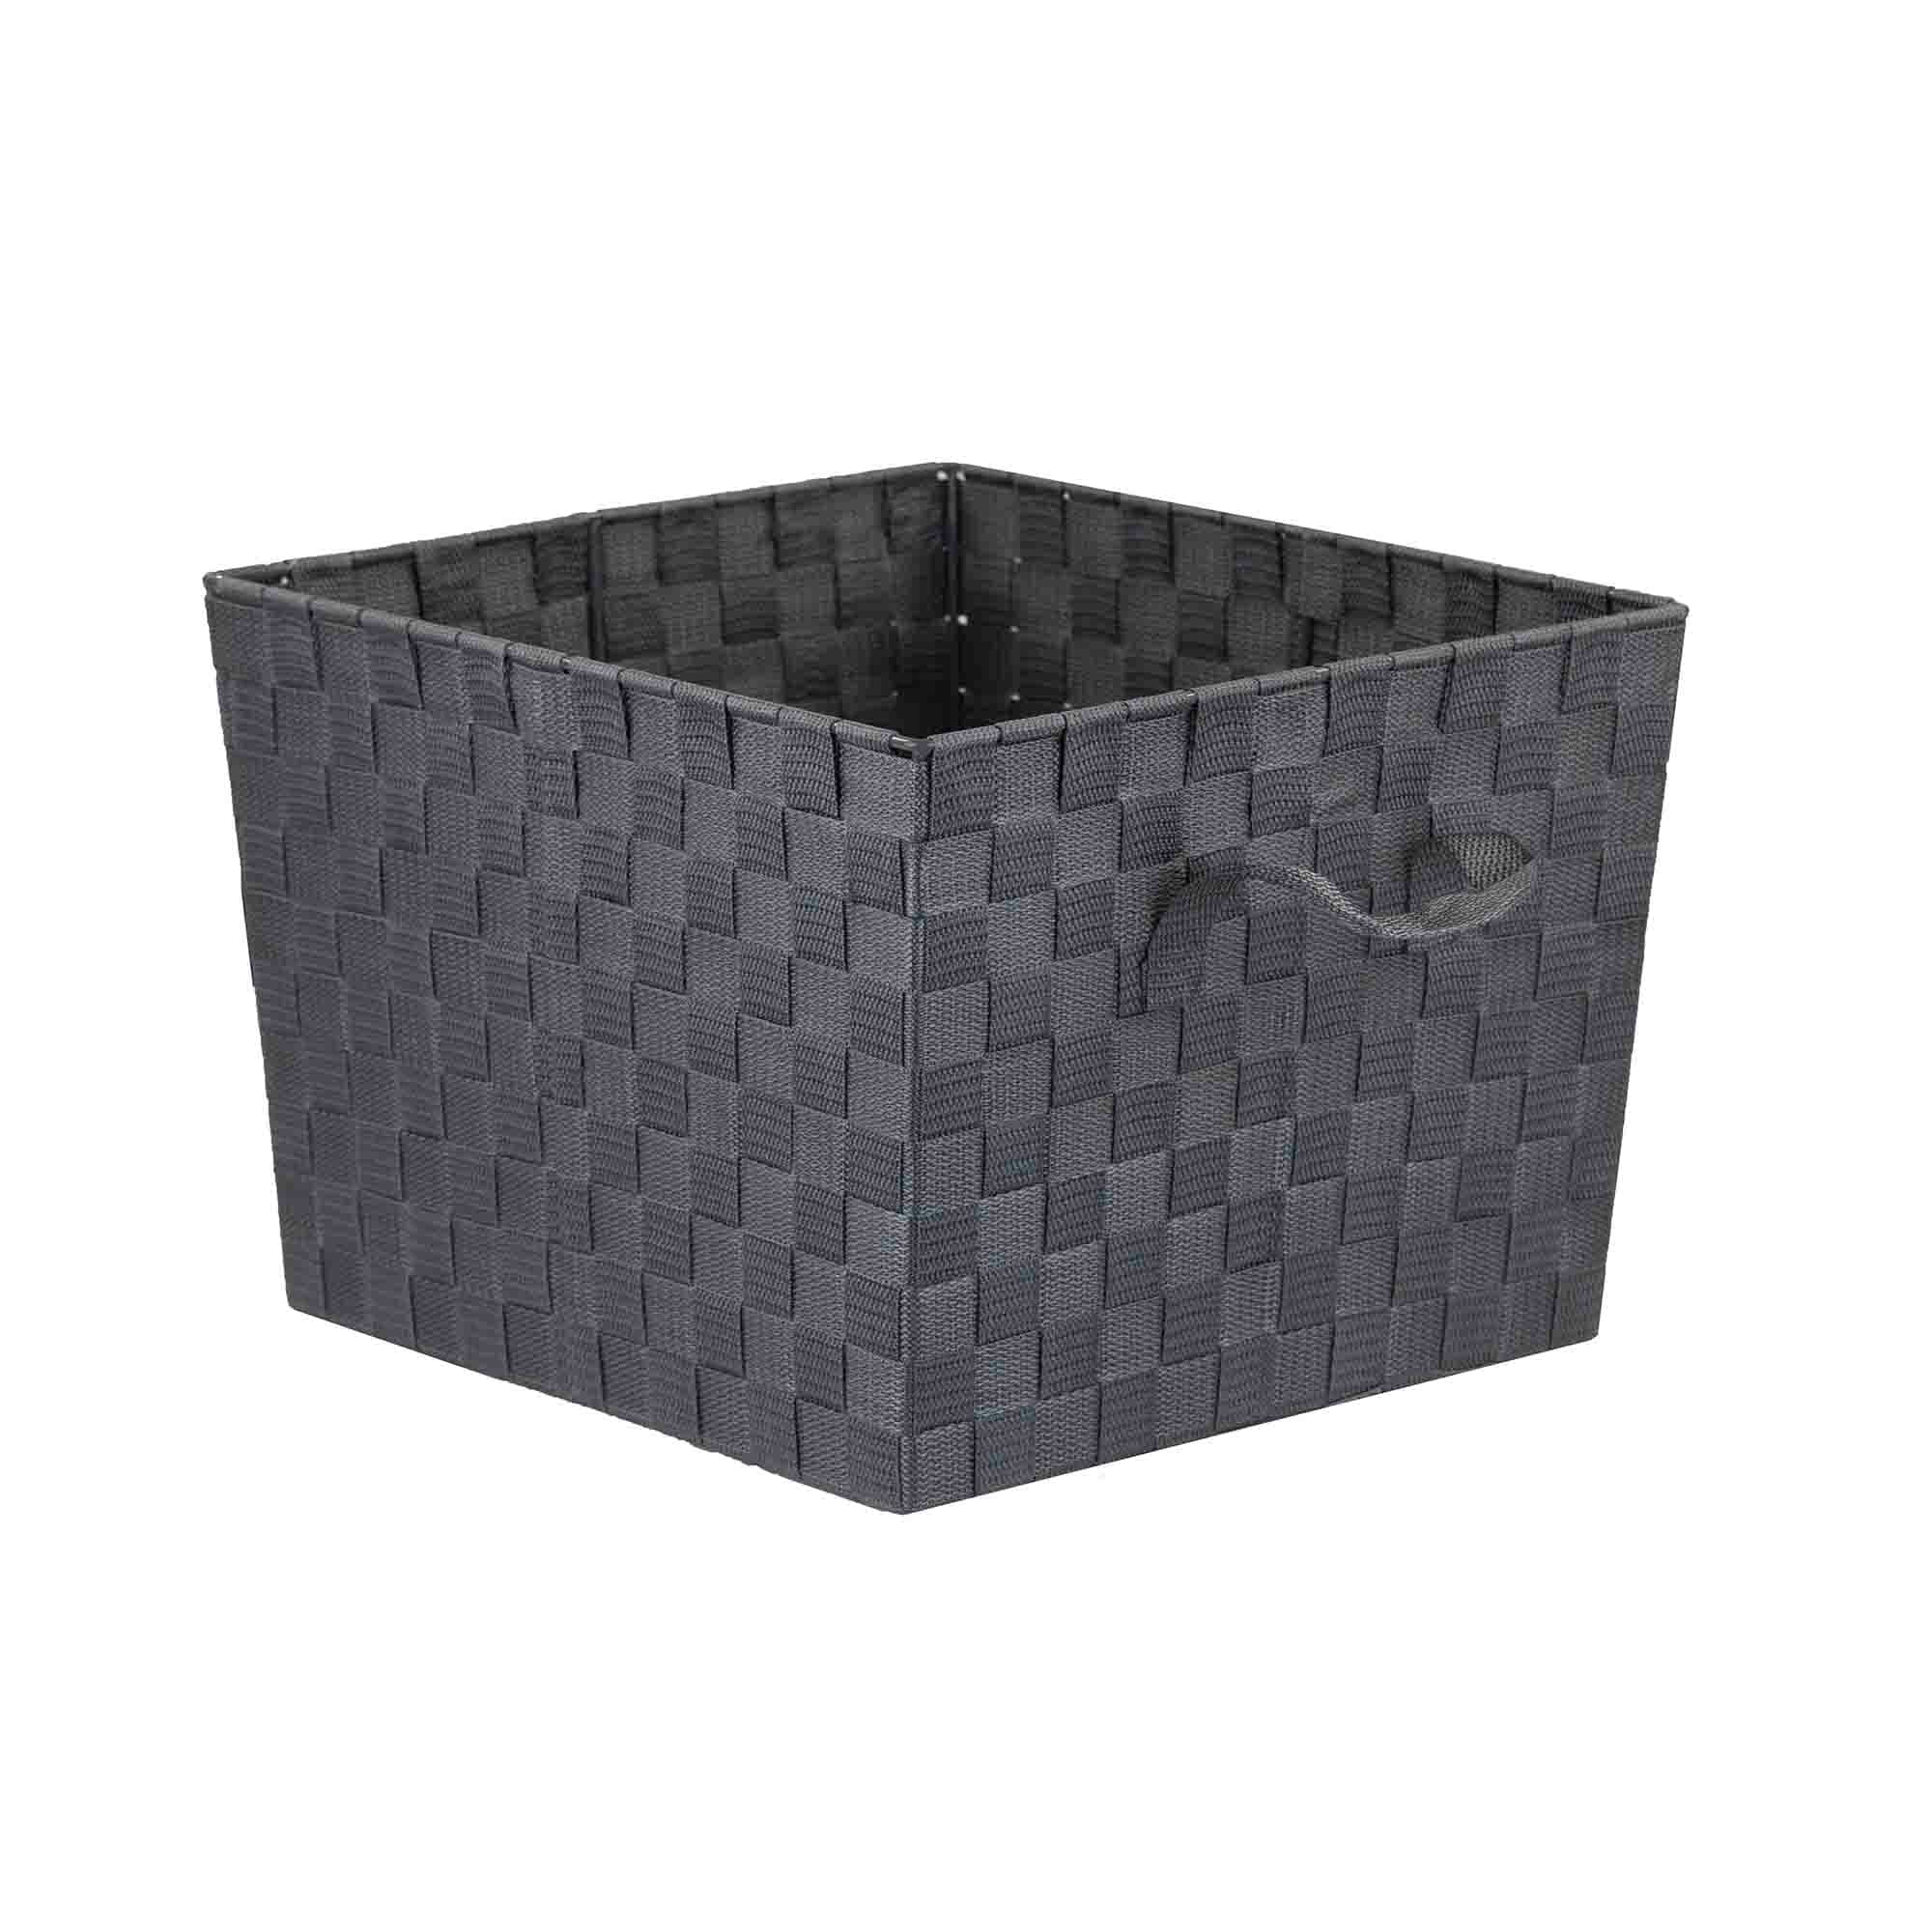 Home Basics X-Large Polyester Woven Strap Open Bin, Grey $10.00 EACH, CASE PACK OF 6